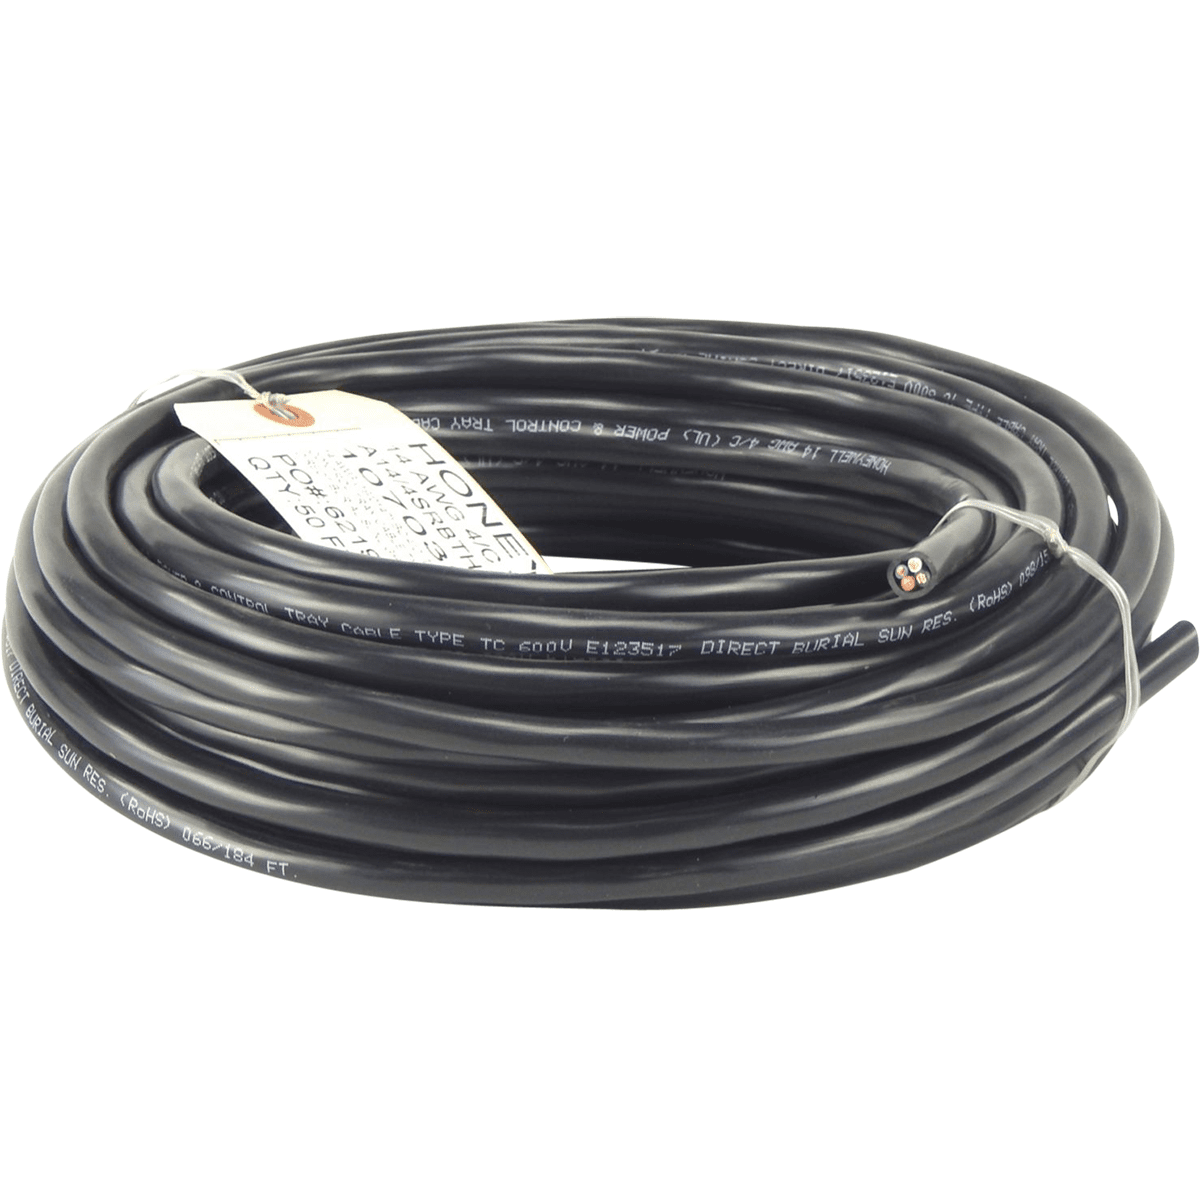 1/4"" X 1/4"" 50 Ft Stranded Tray Cable Wire